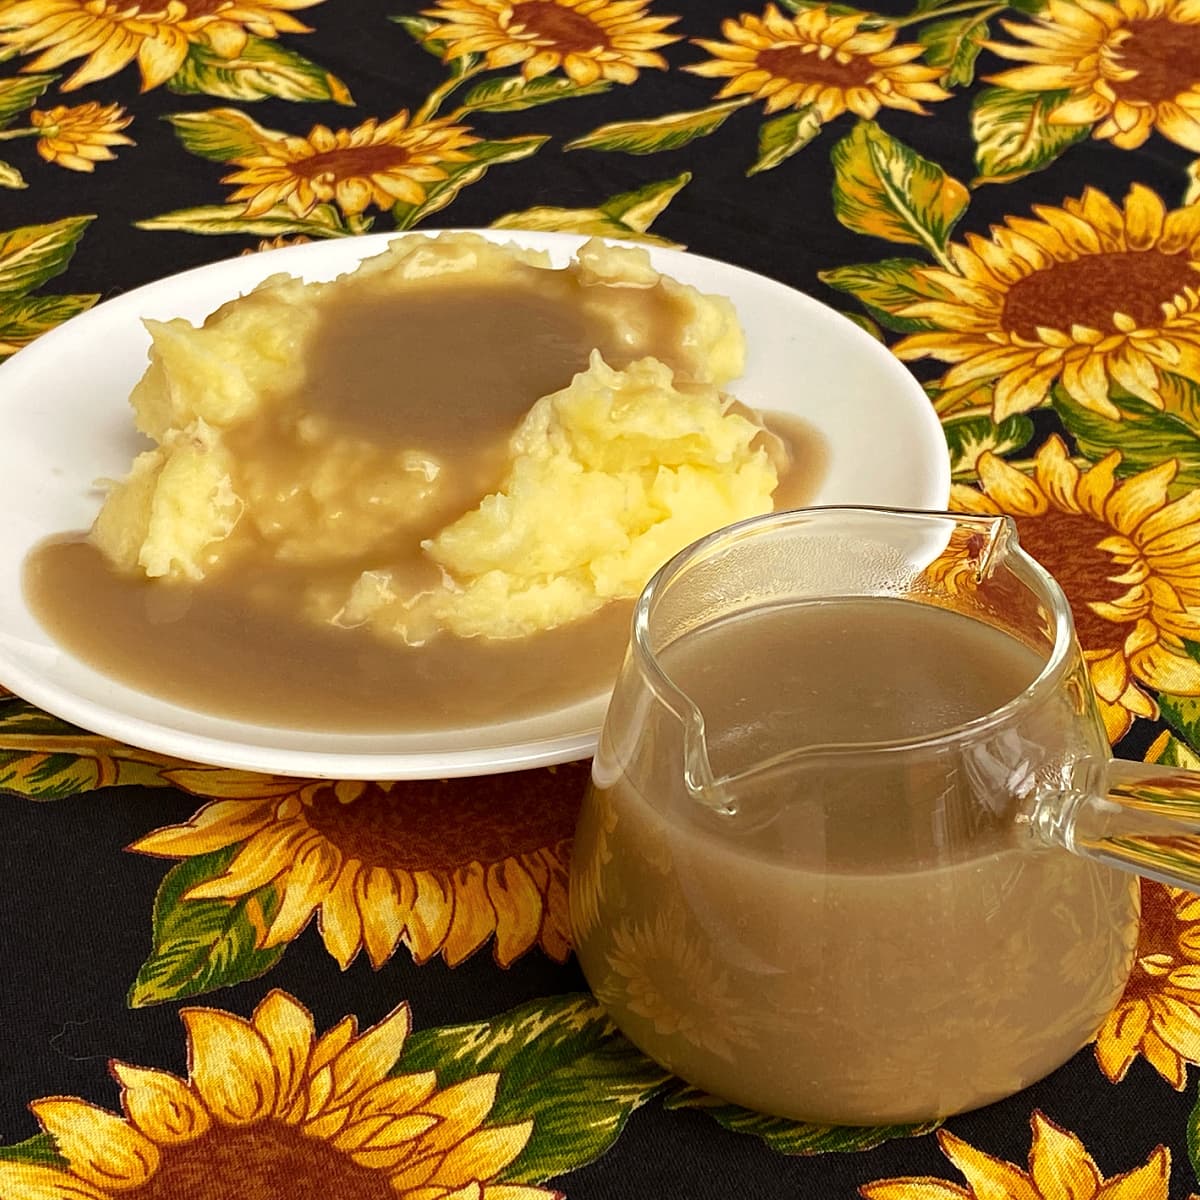 Turkey gravy in a glass sauce cup, and a small plate of mashed potatoes on a plate to the left.